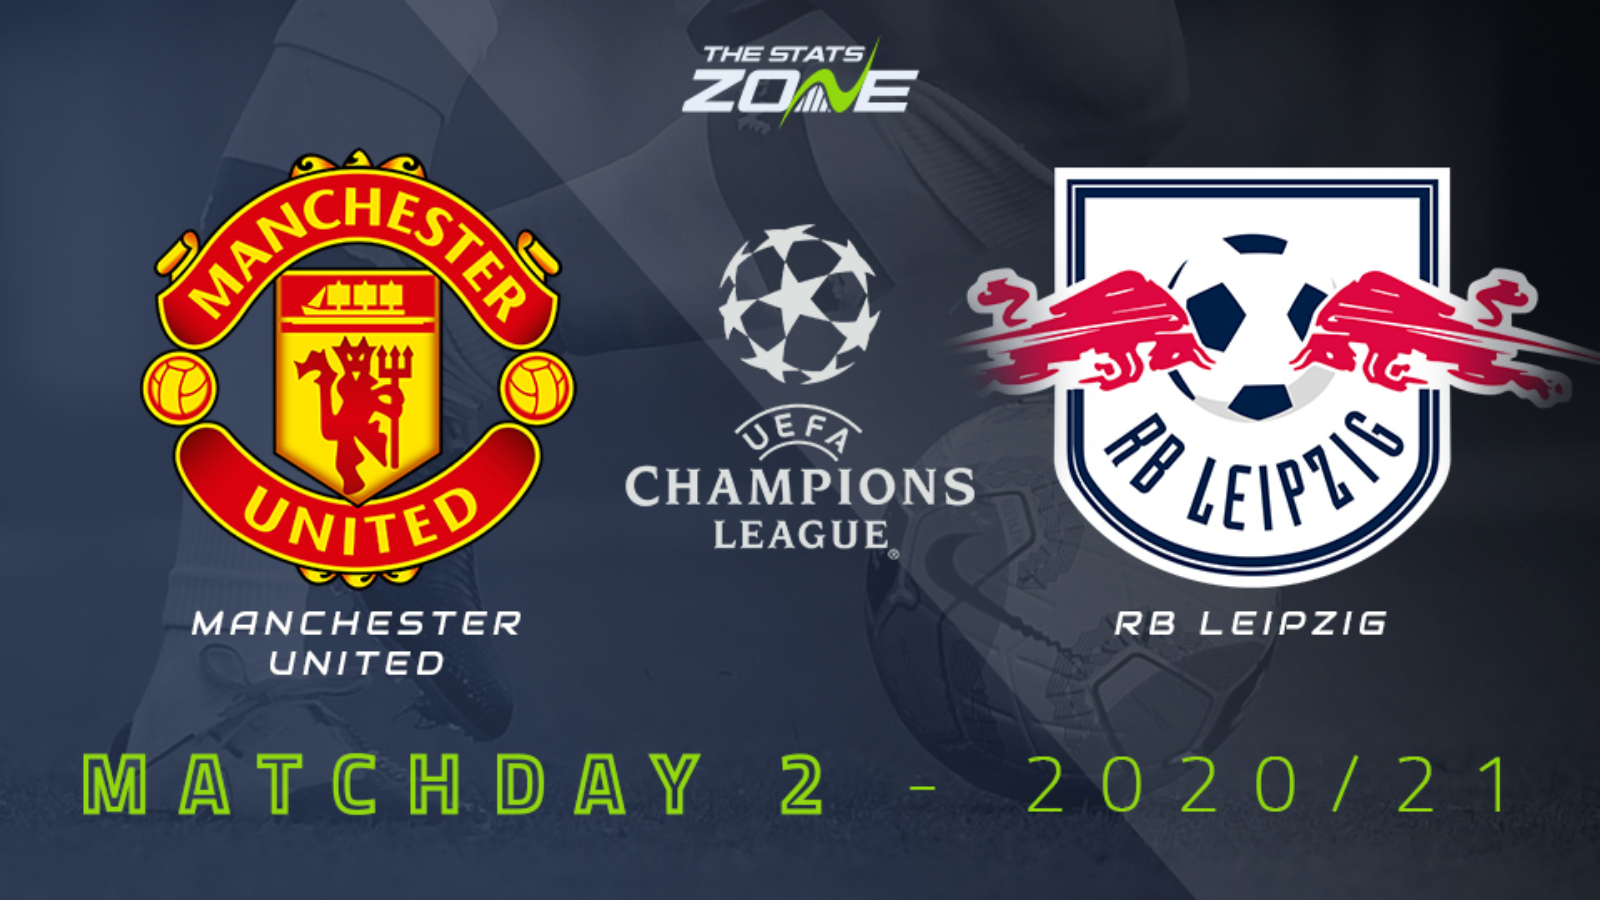 2020 21 Uefa Champions League Man Utd Vs Rb Leipzig Preview Prediction The Stats Zone